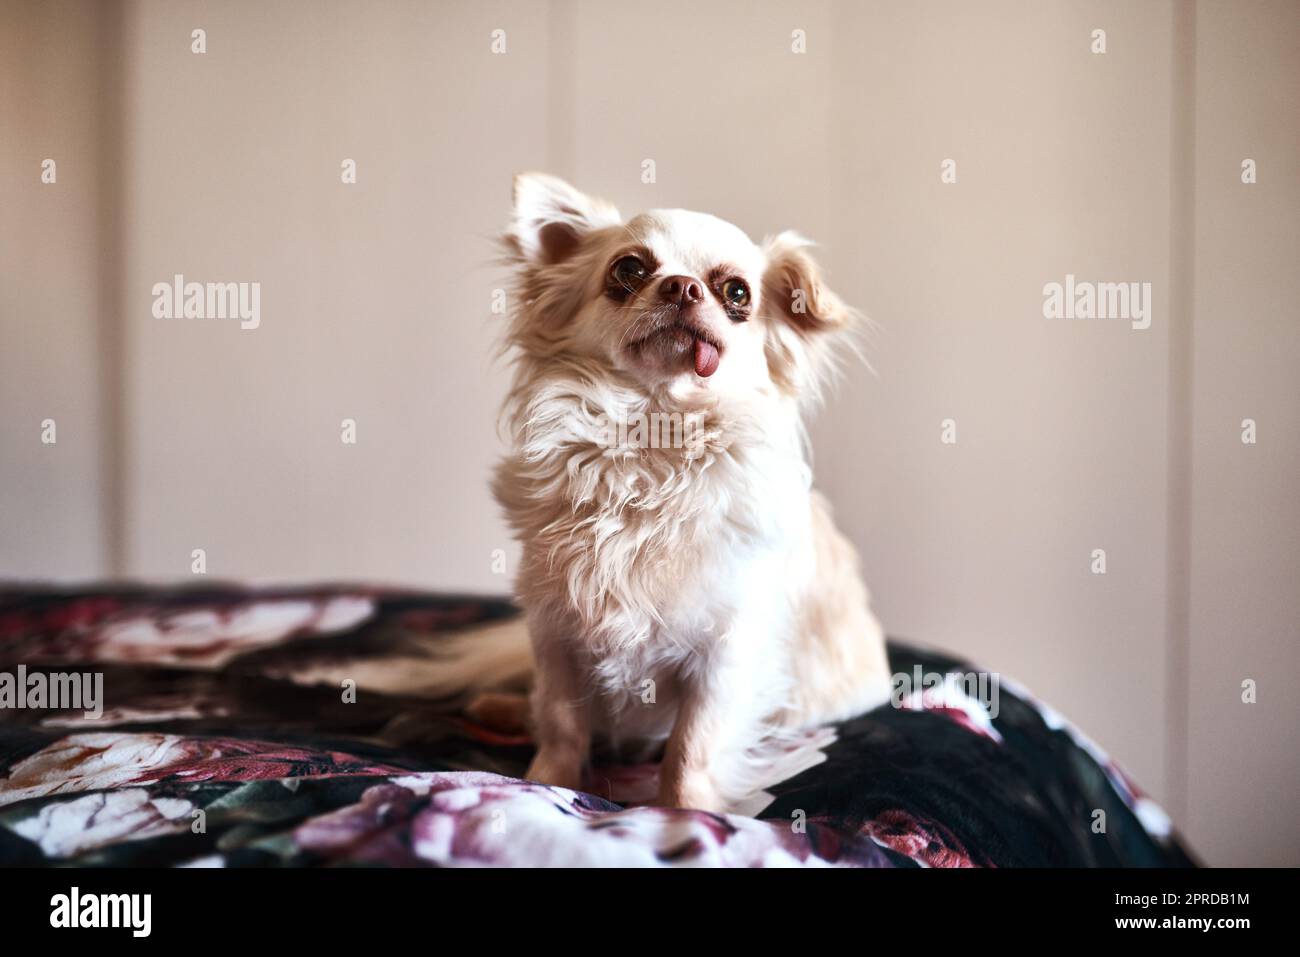 I make the rules around here. an adorable dog sitting on the bed. Stock Photo